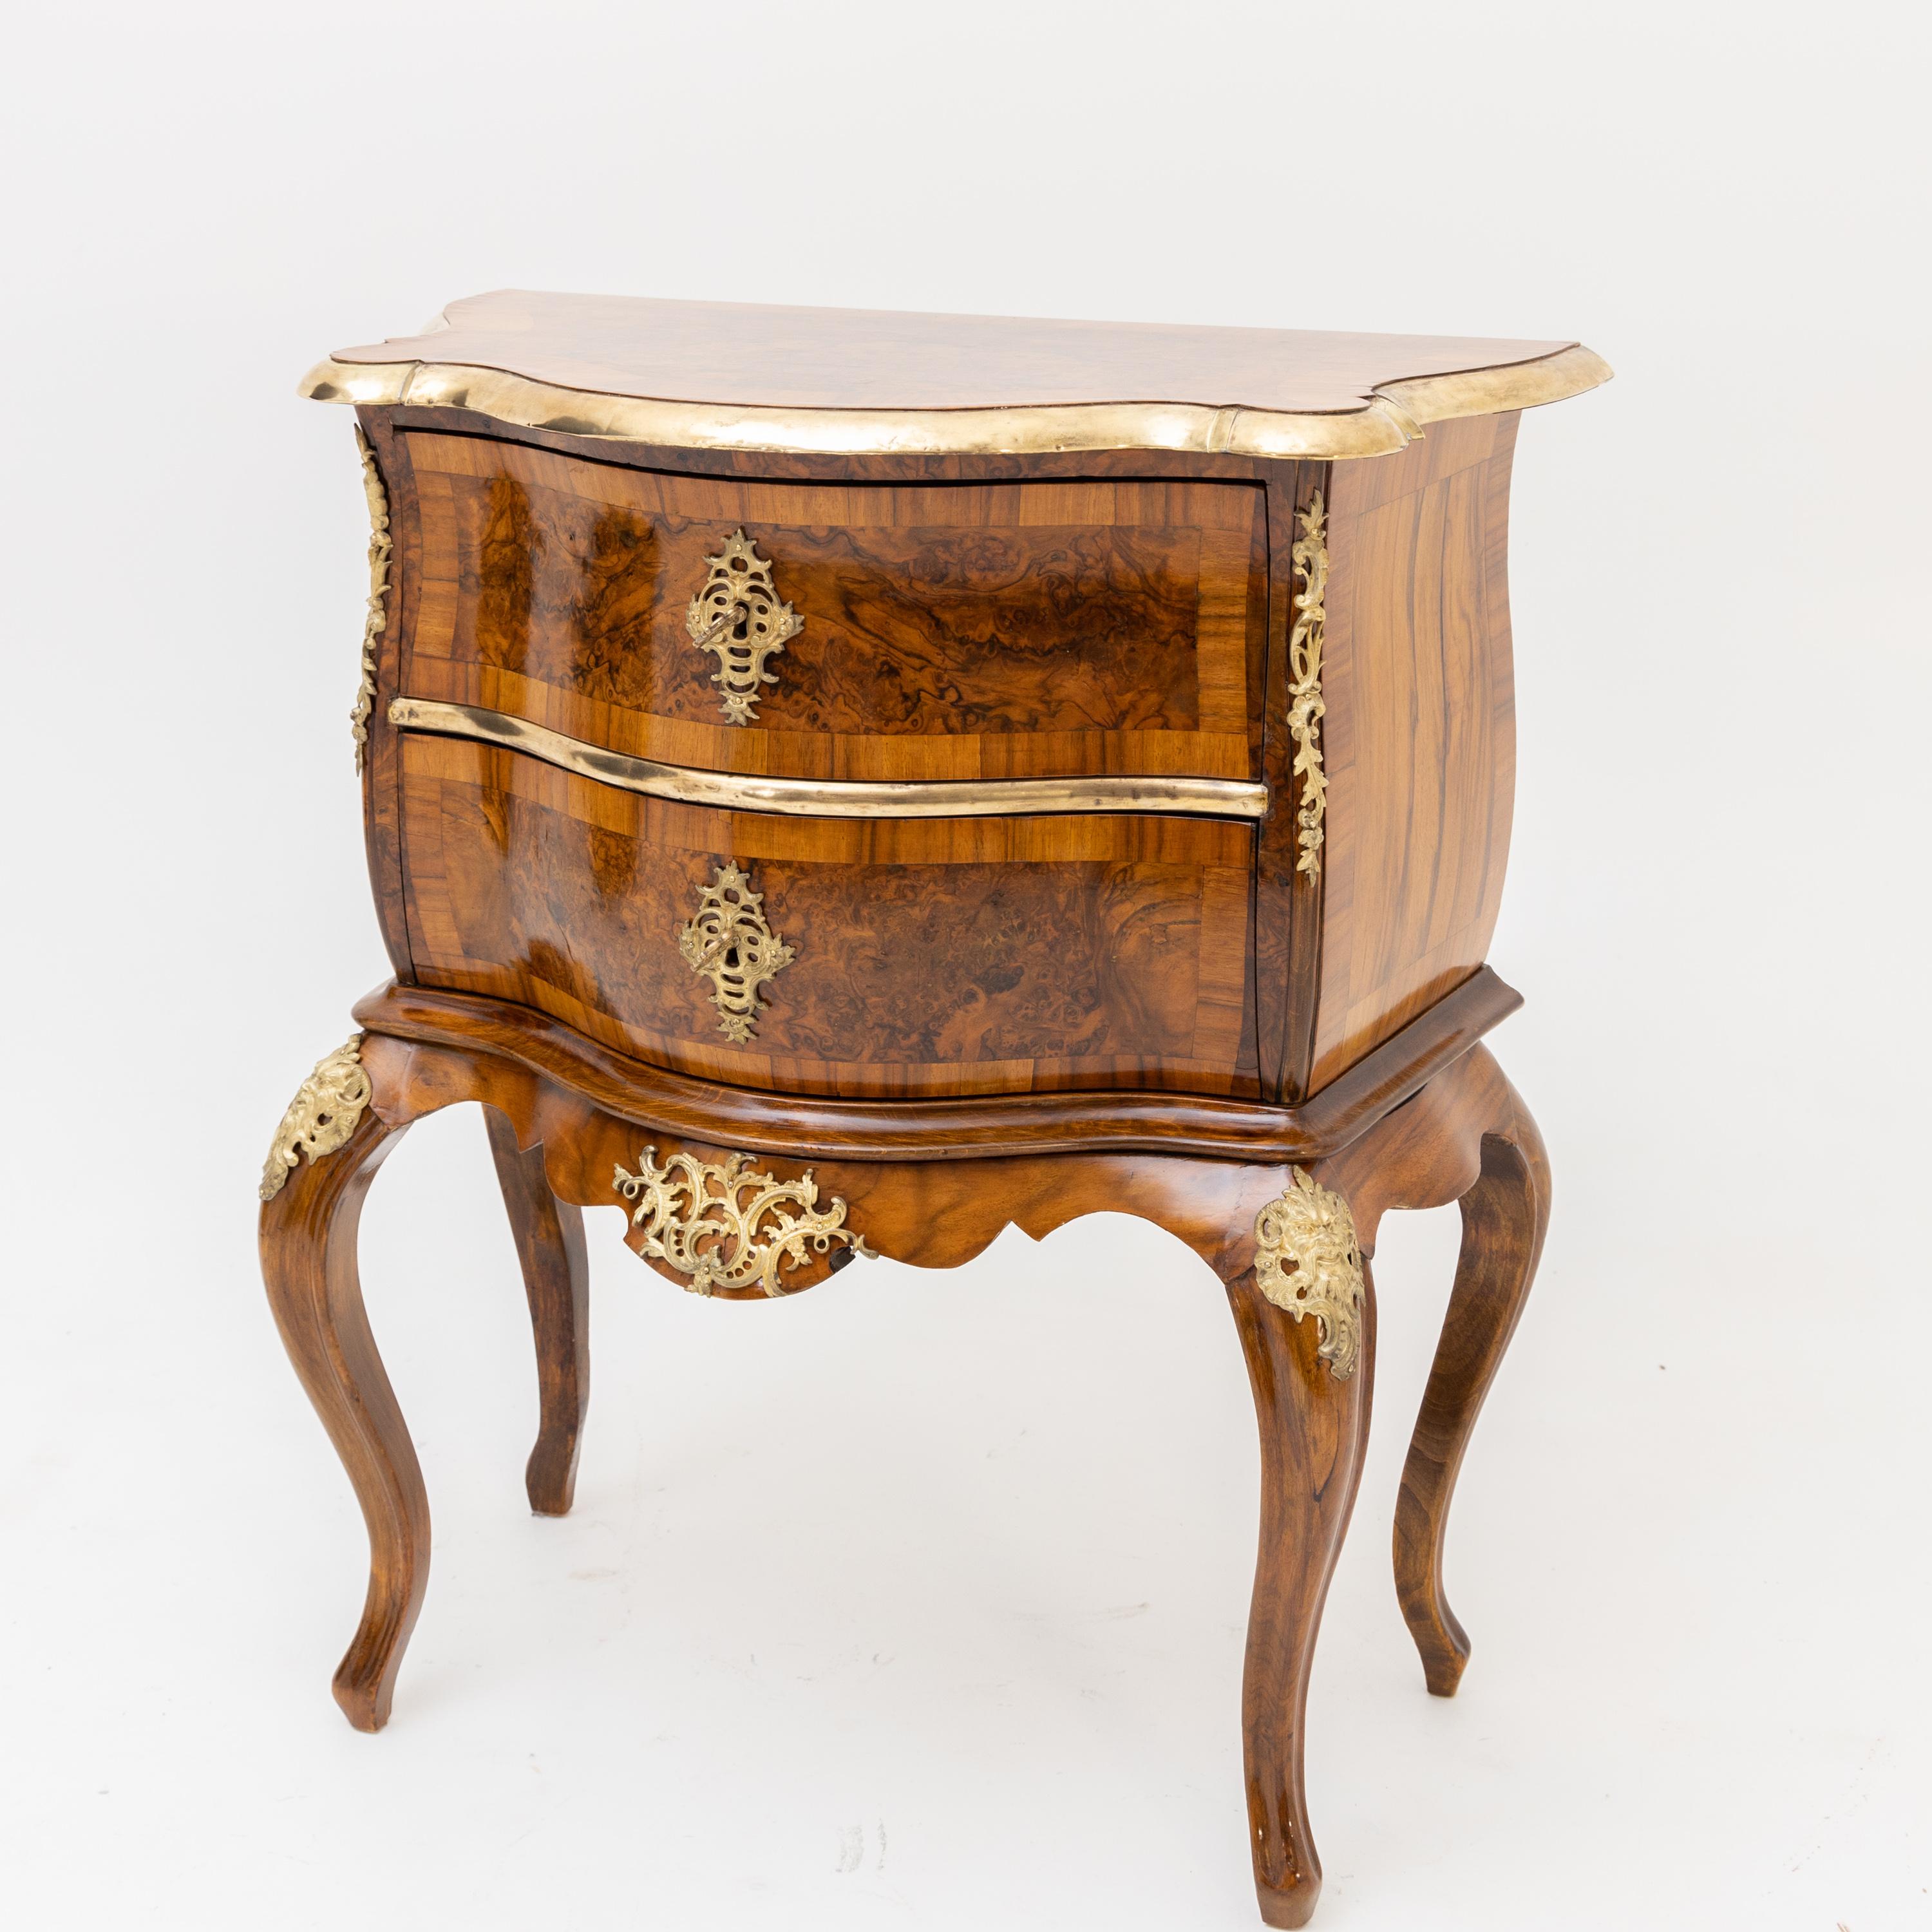 Small two-drawer chest of drawers on s-legs with pronounced shoulders and curved apron. The corpus is slightly convex and trapezoidal. The edge and crosspiece are set off in gold. Fire-gilt fittings on the front, the corners and the shoulders (here